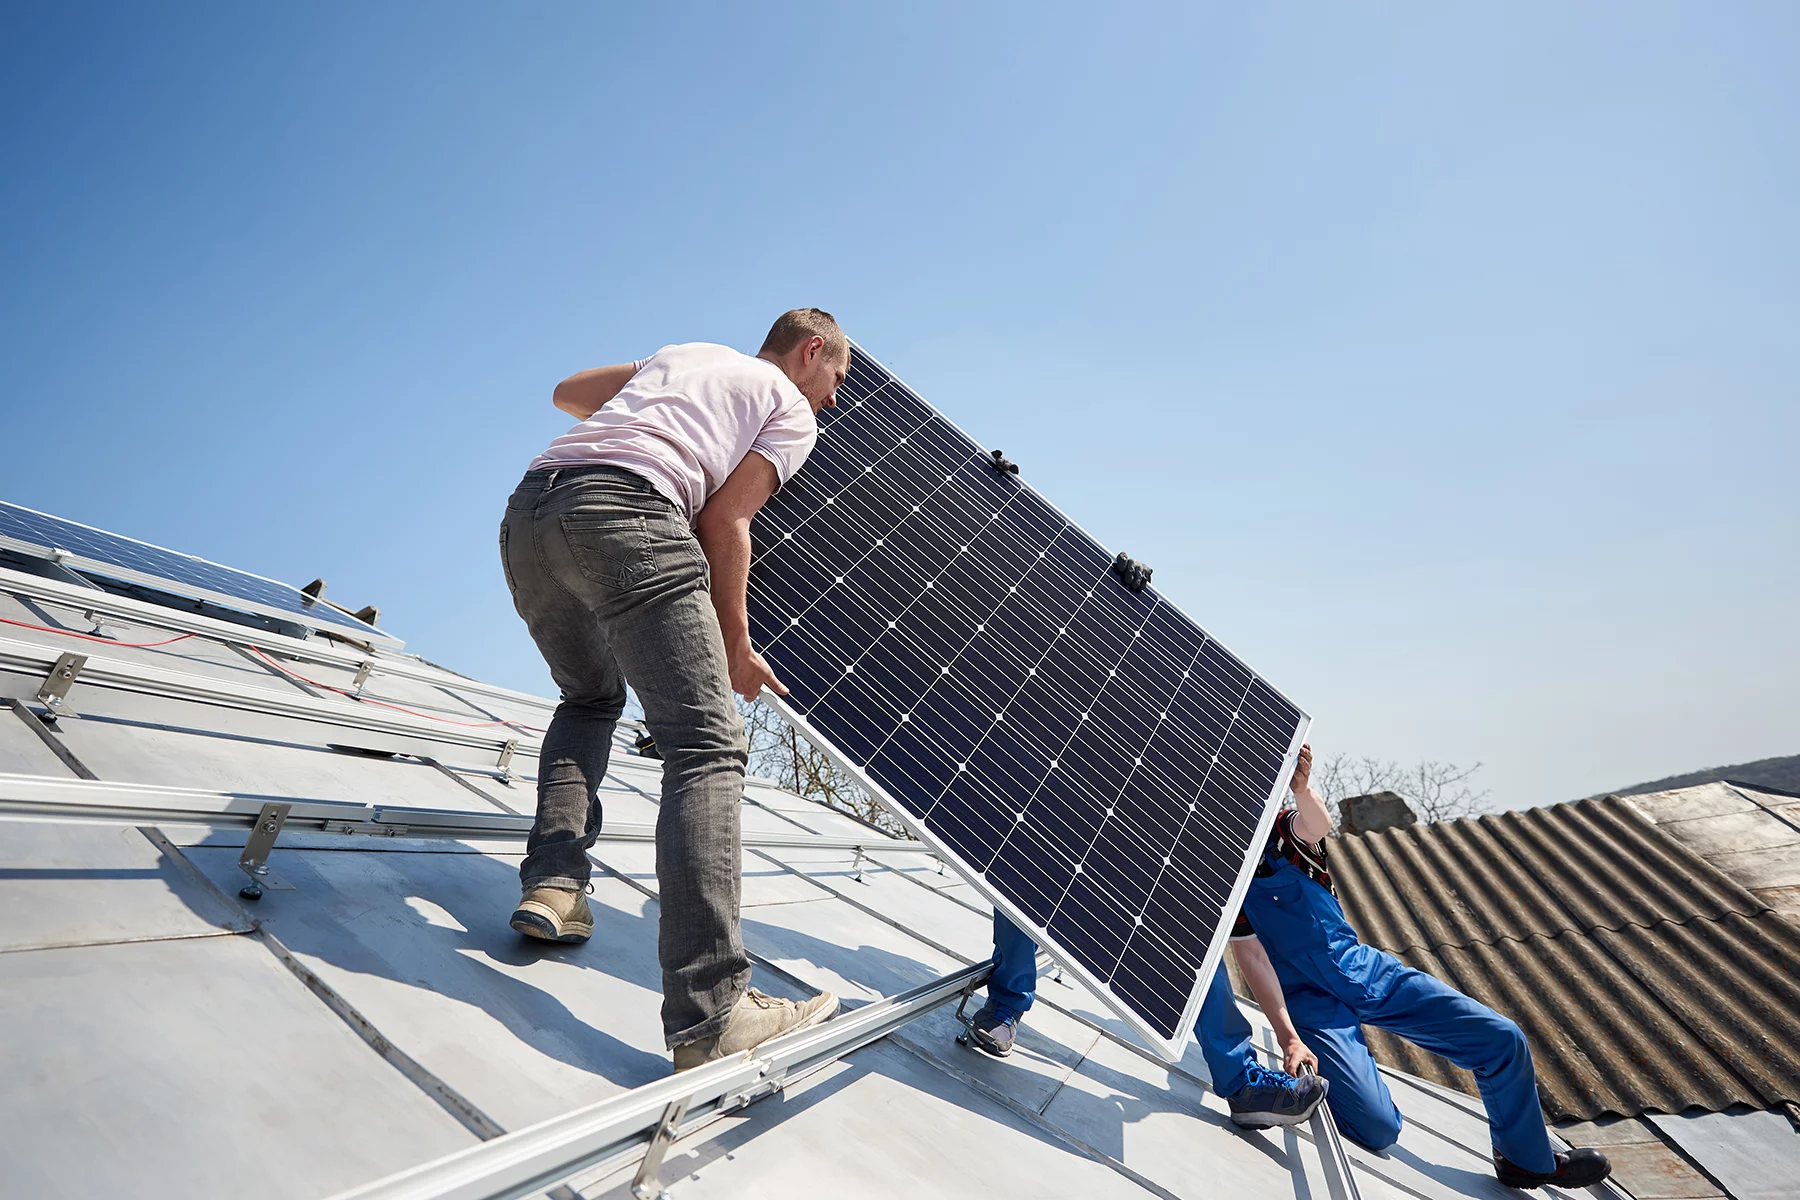 Men installing solar panels on the roof of a home